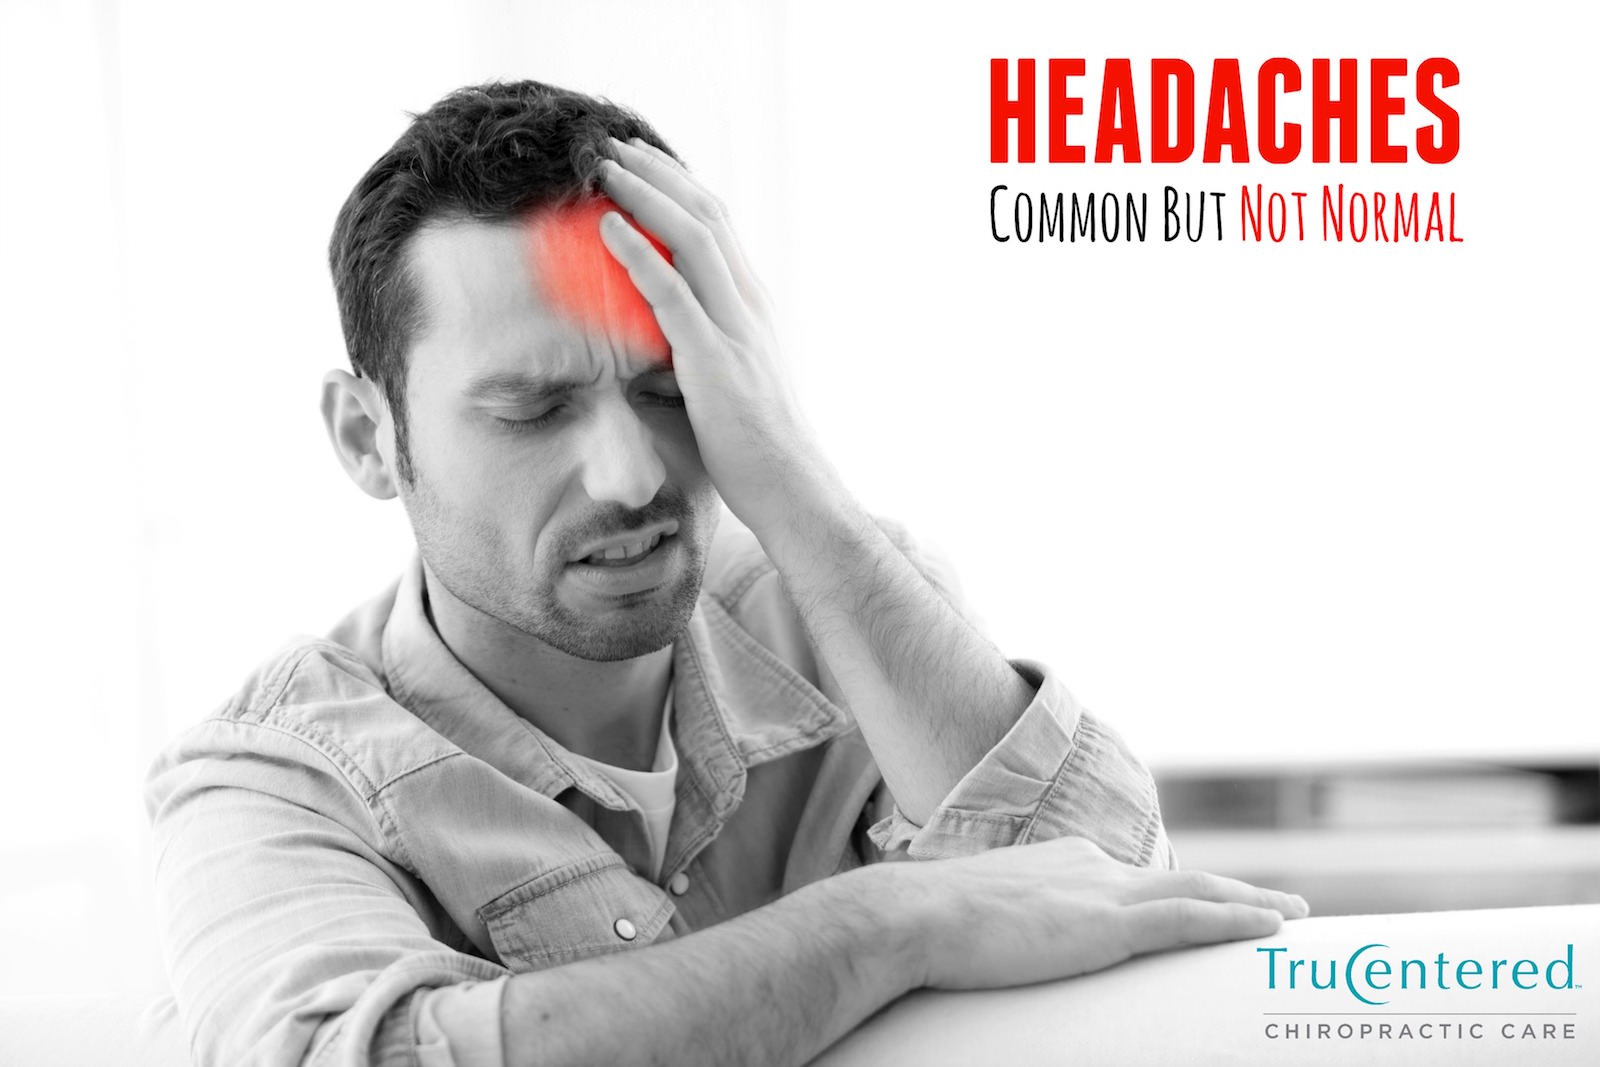 There are many different types of headache